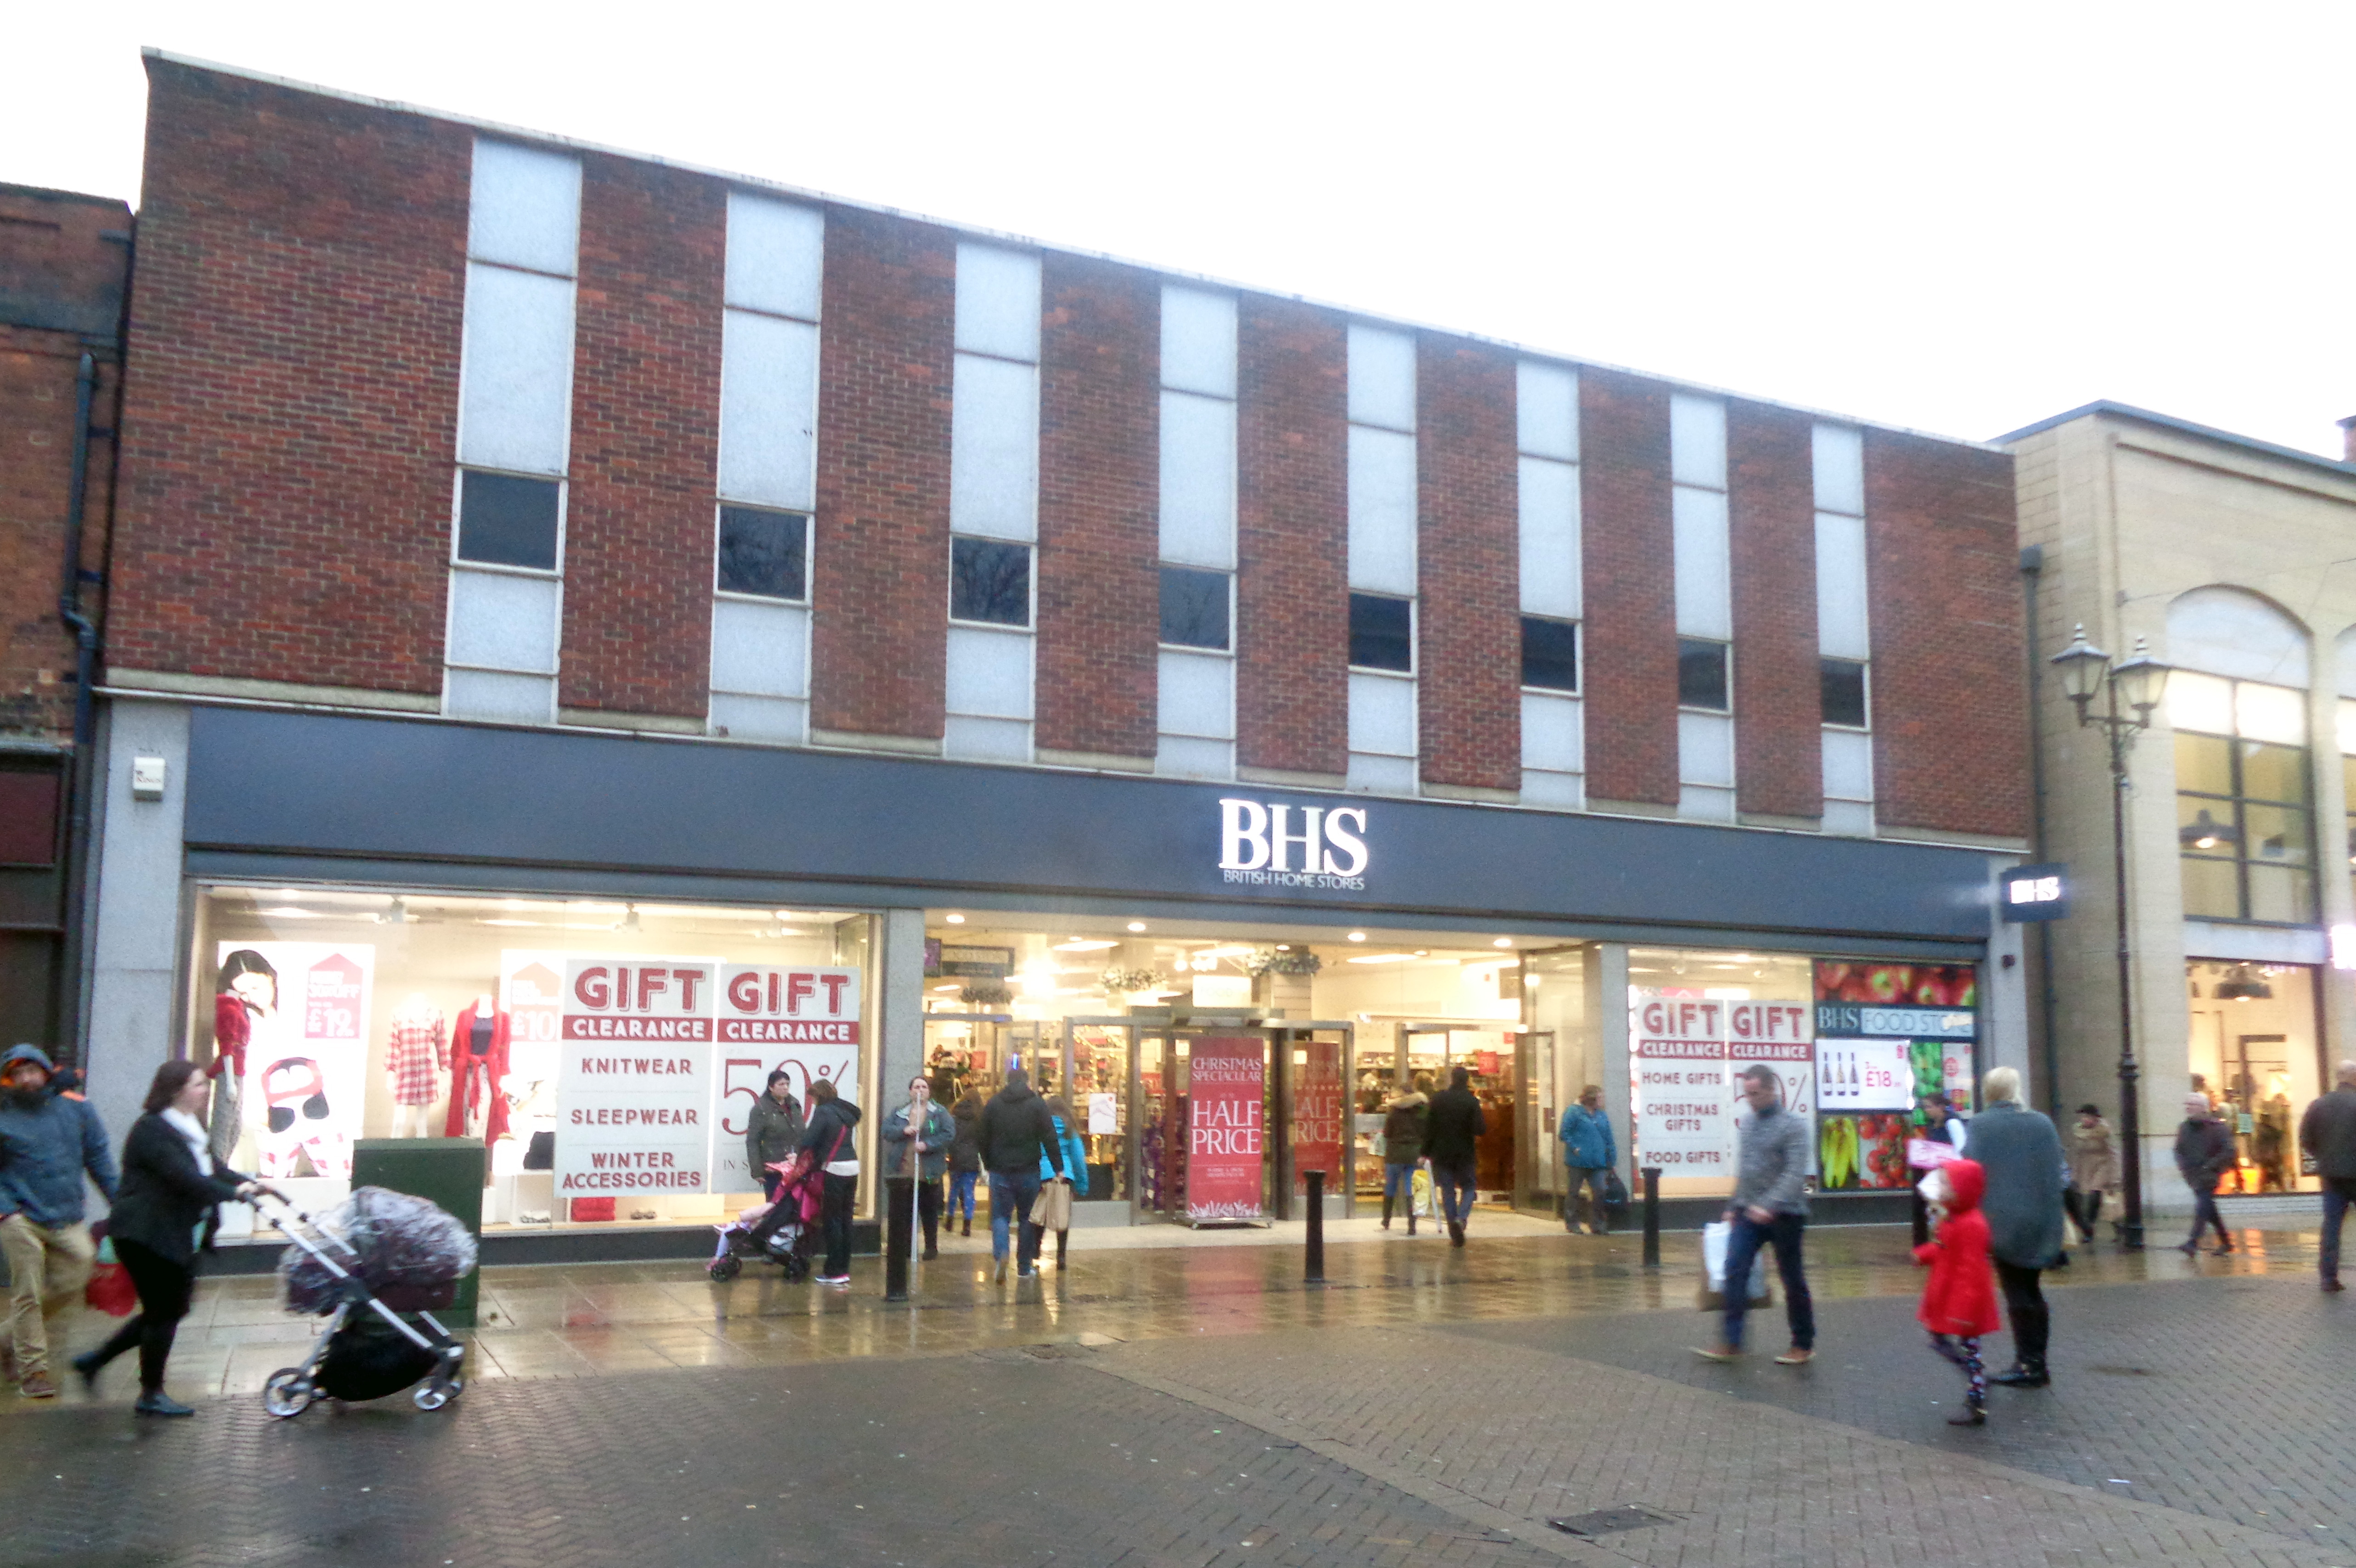 Staff should be concern after damning BHS report